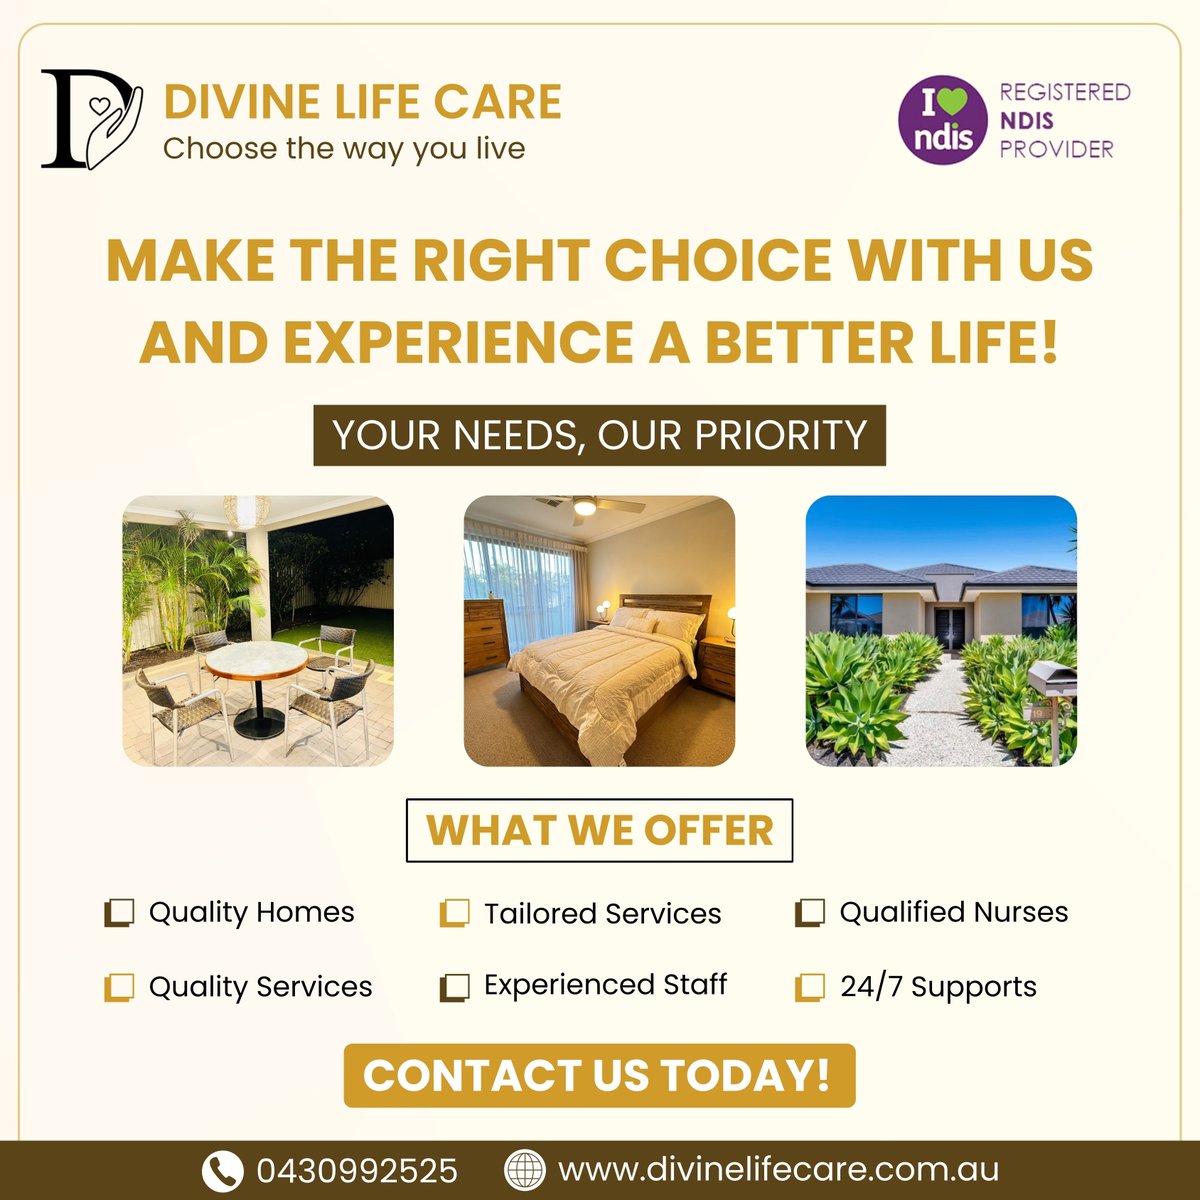 Get in touch with Divine Life Care today and discover how we can help you live your best life.

#divinelife #ndisperth #ndissupport #NDIS #ndisready #ndisprovider #ndisapproved #NDIScommunity #ndisaustralia #ndisserviceprovider #ndisregisteredprovider #perth #bunbury